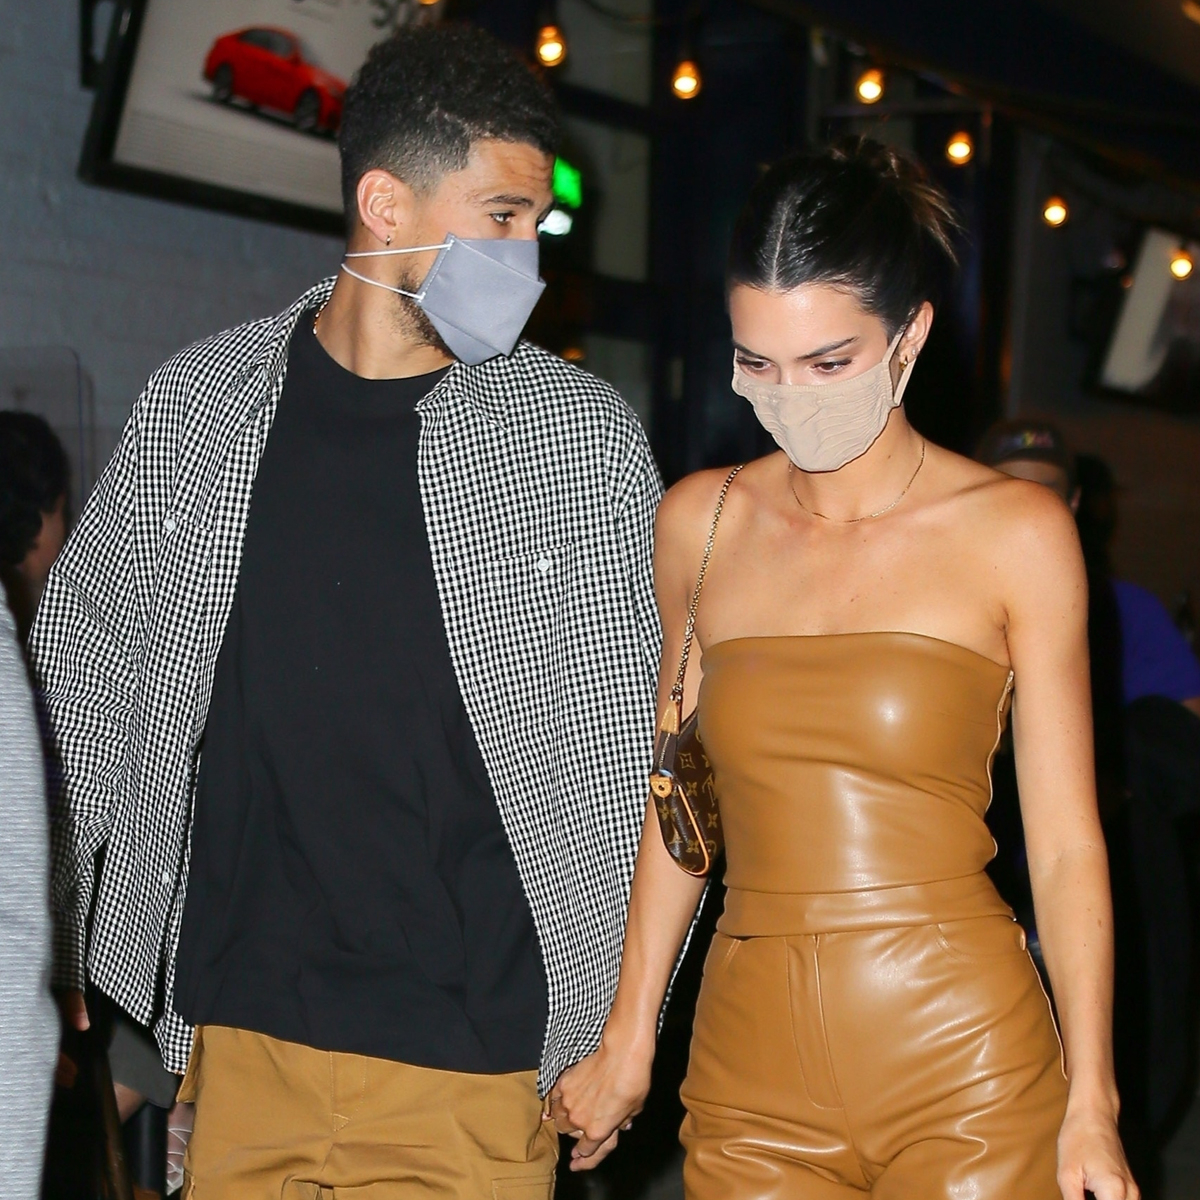 Kendall Jenner and her boyfriend Devin Booker are spotted leaving